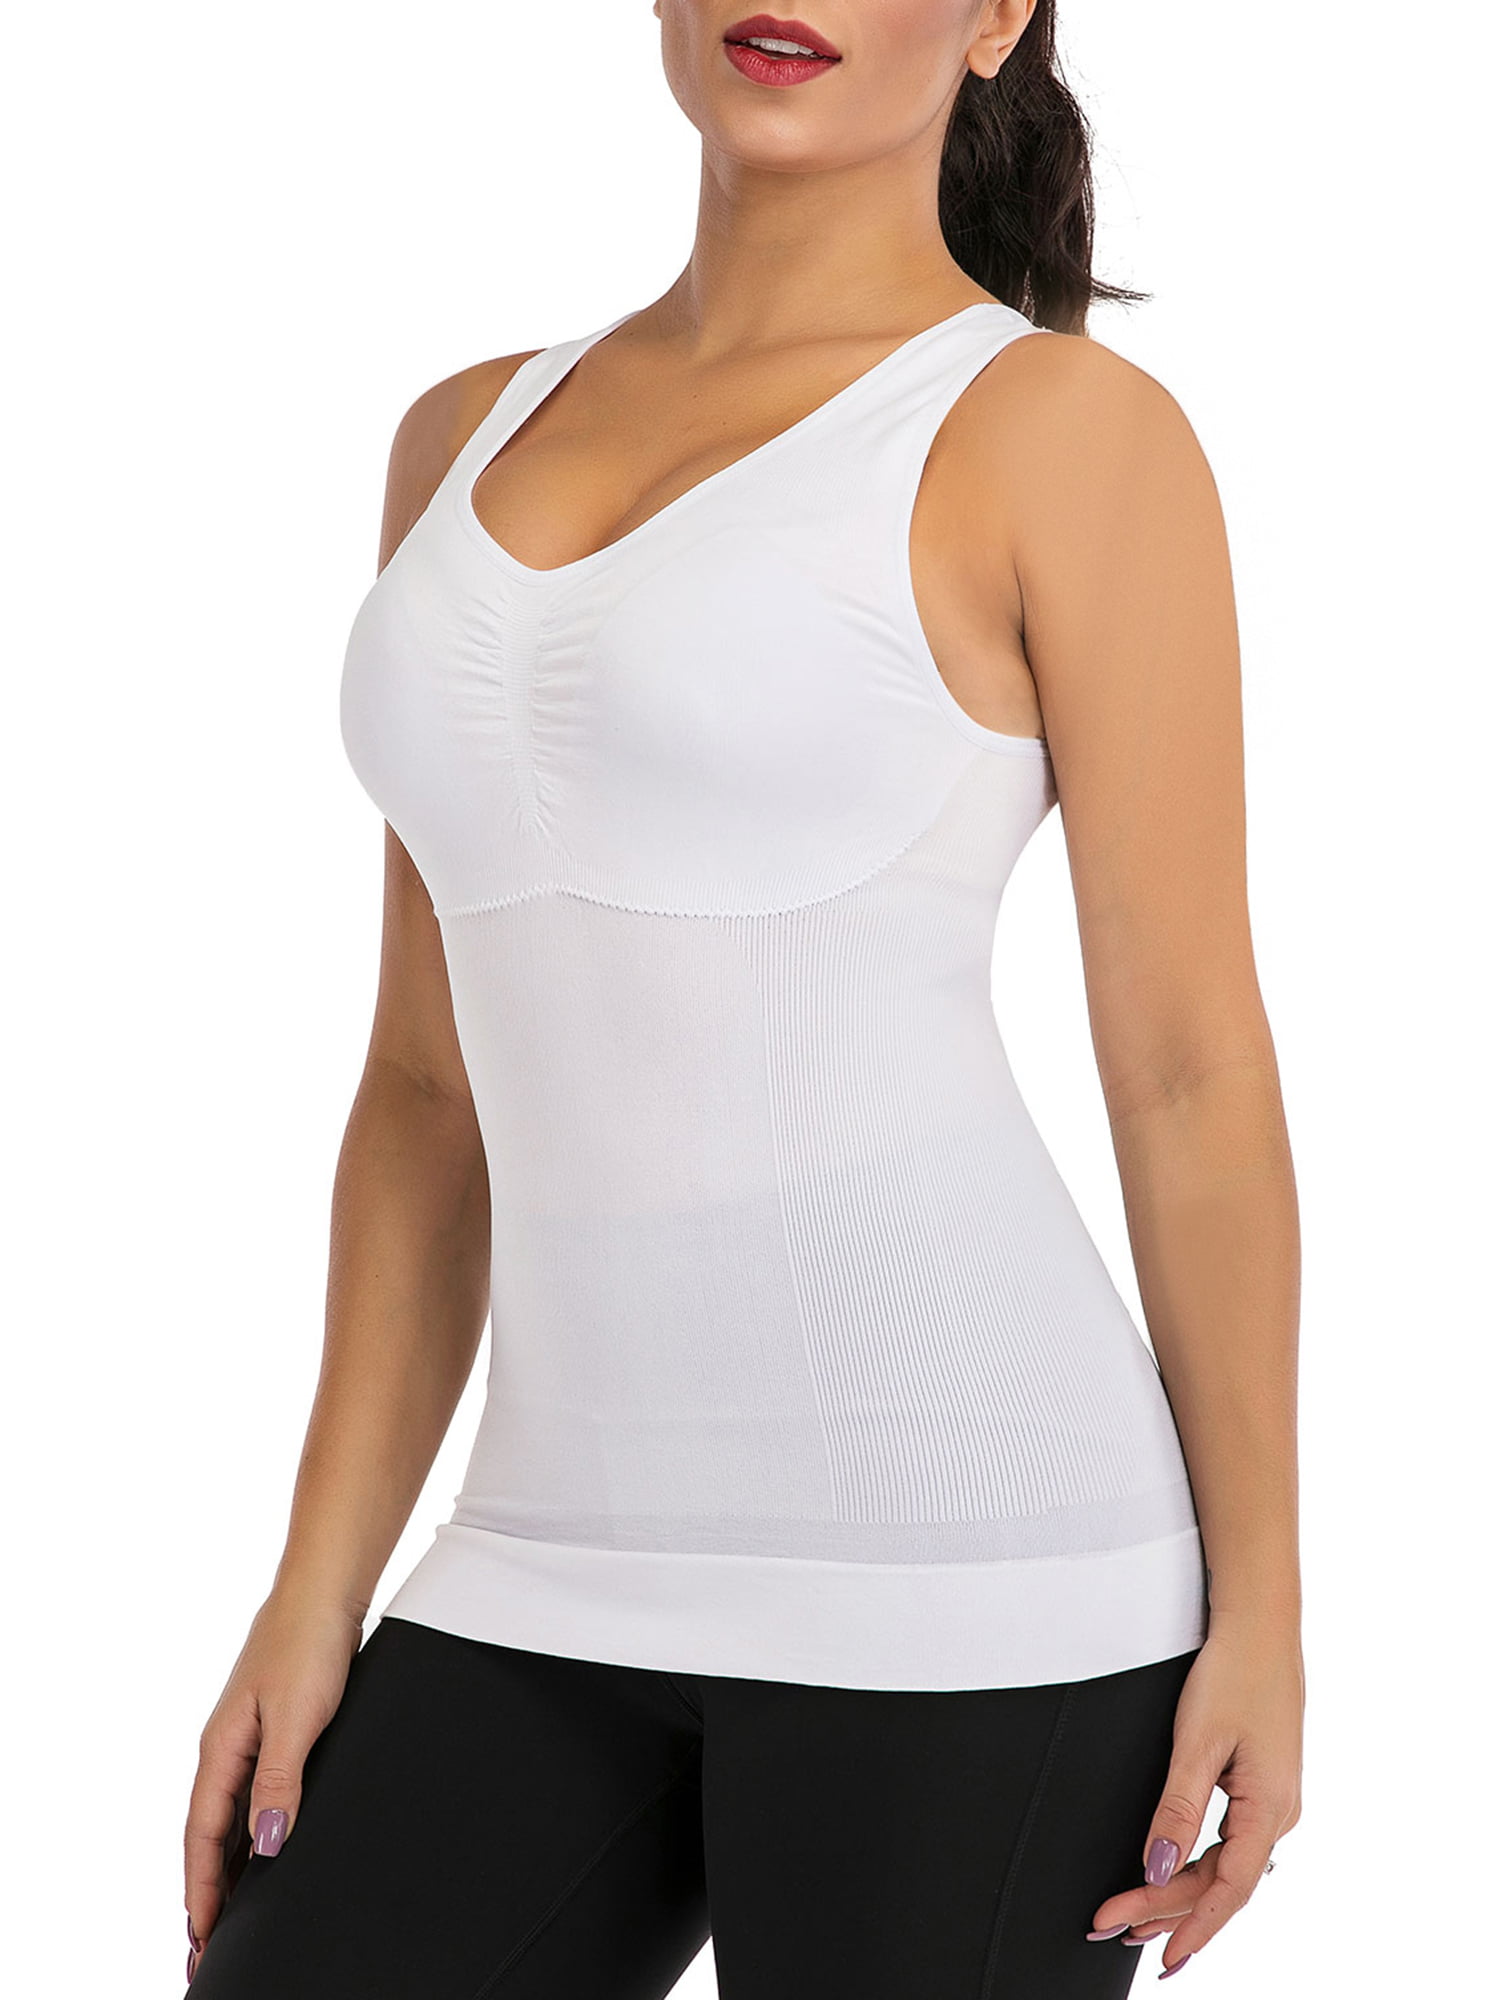 Super Thin Seamless Tank Top For Women Wholesale Body Shaping Camisole  Postpartum Corset For Slimming And Lift From Primali, $17.51